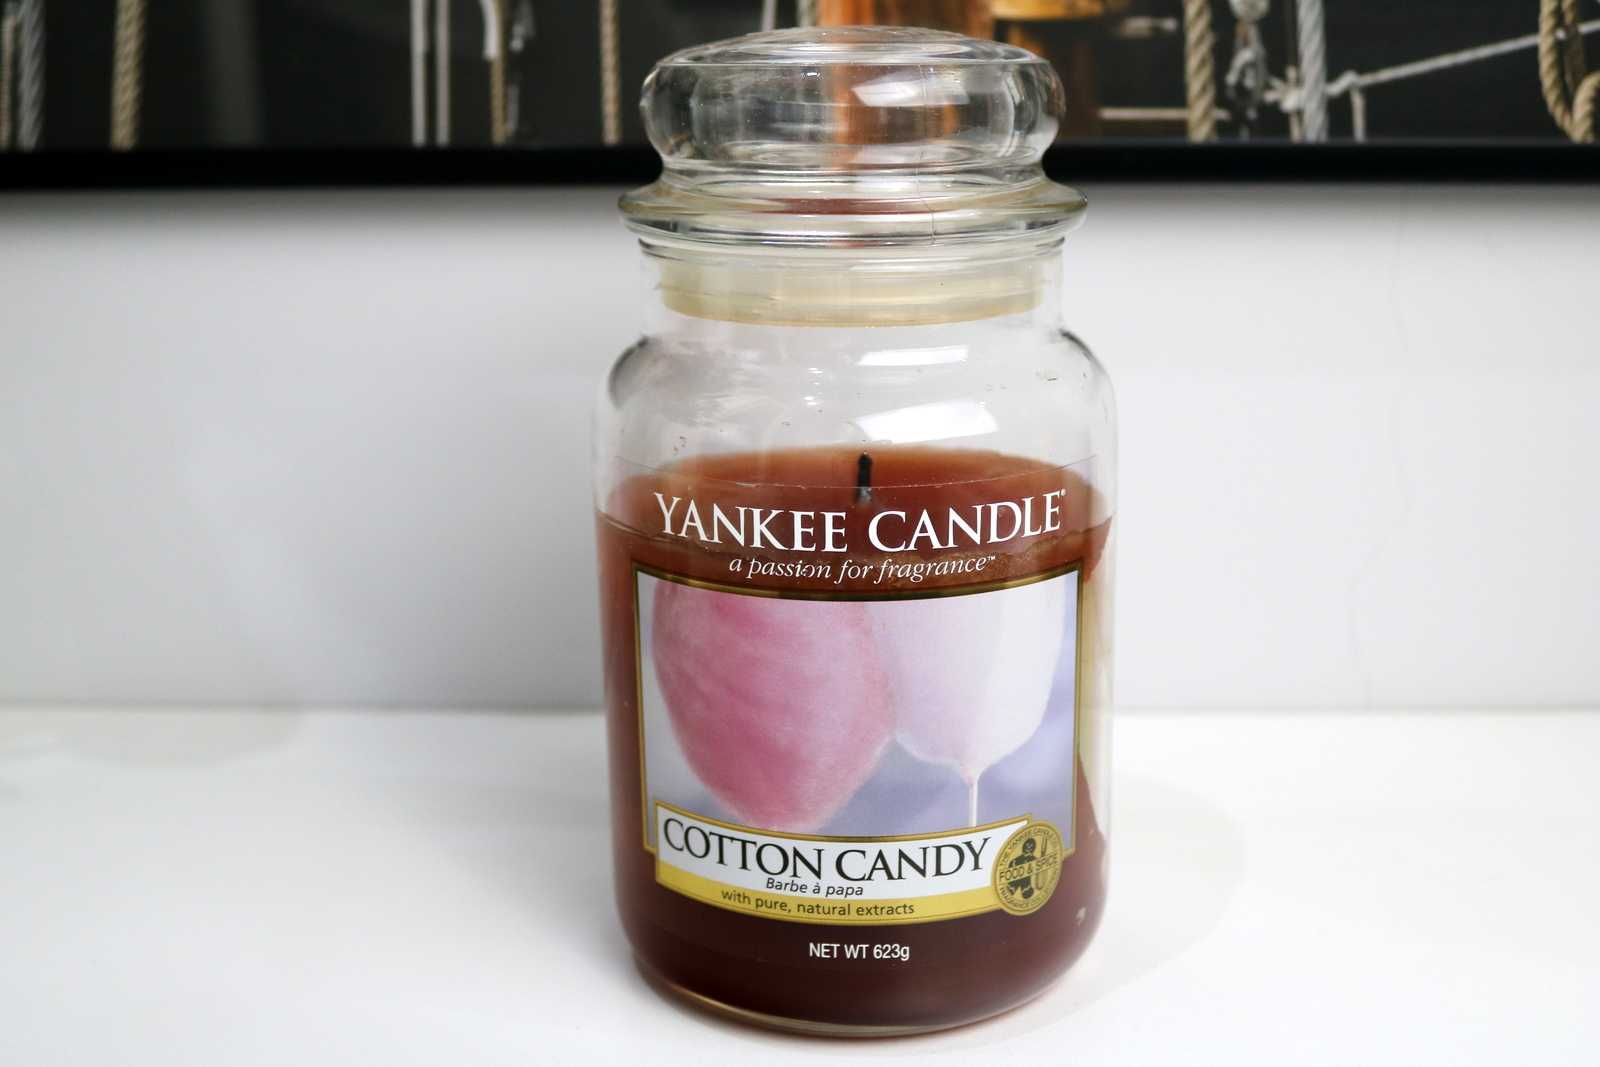 Cotton Candy Yankee Candle